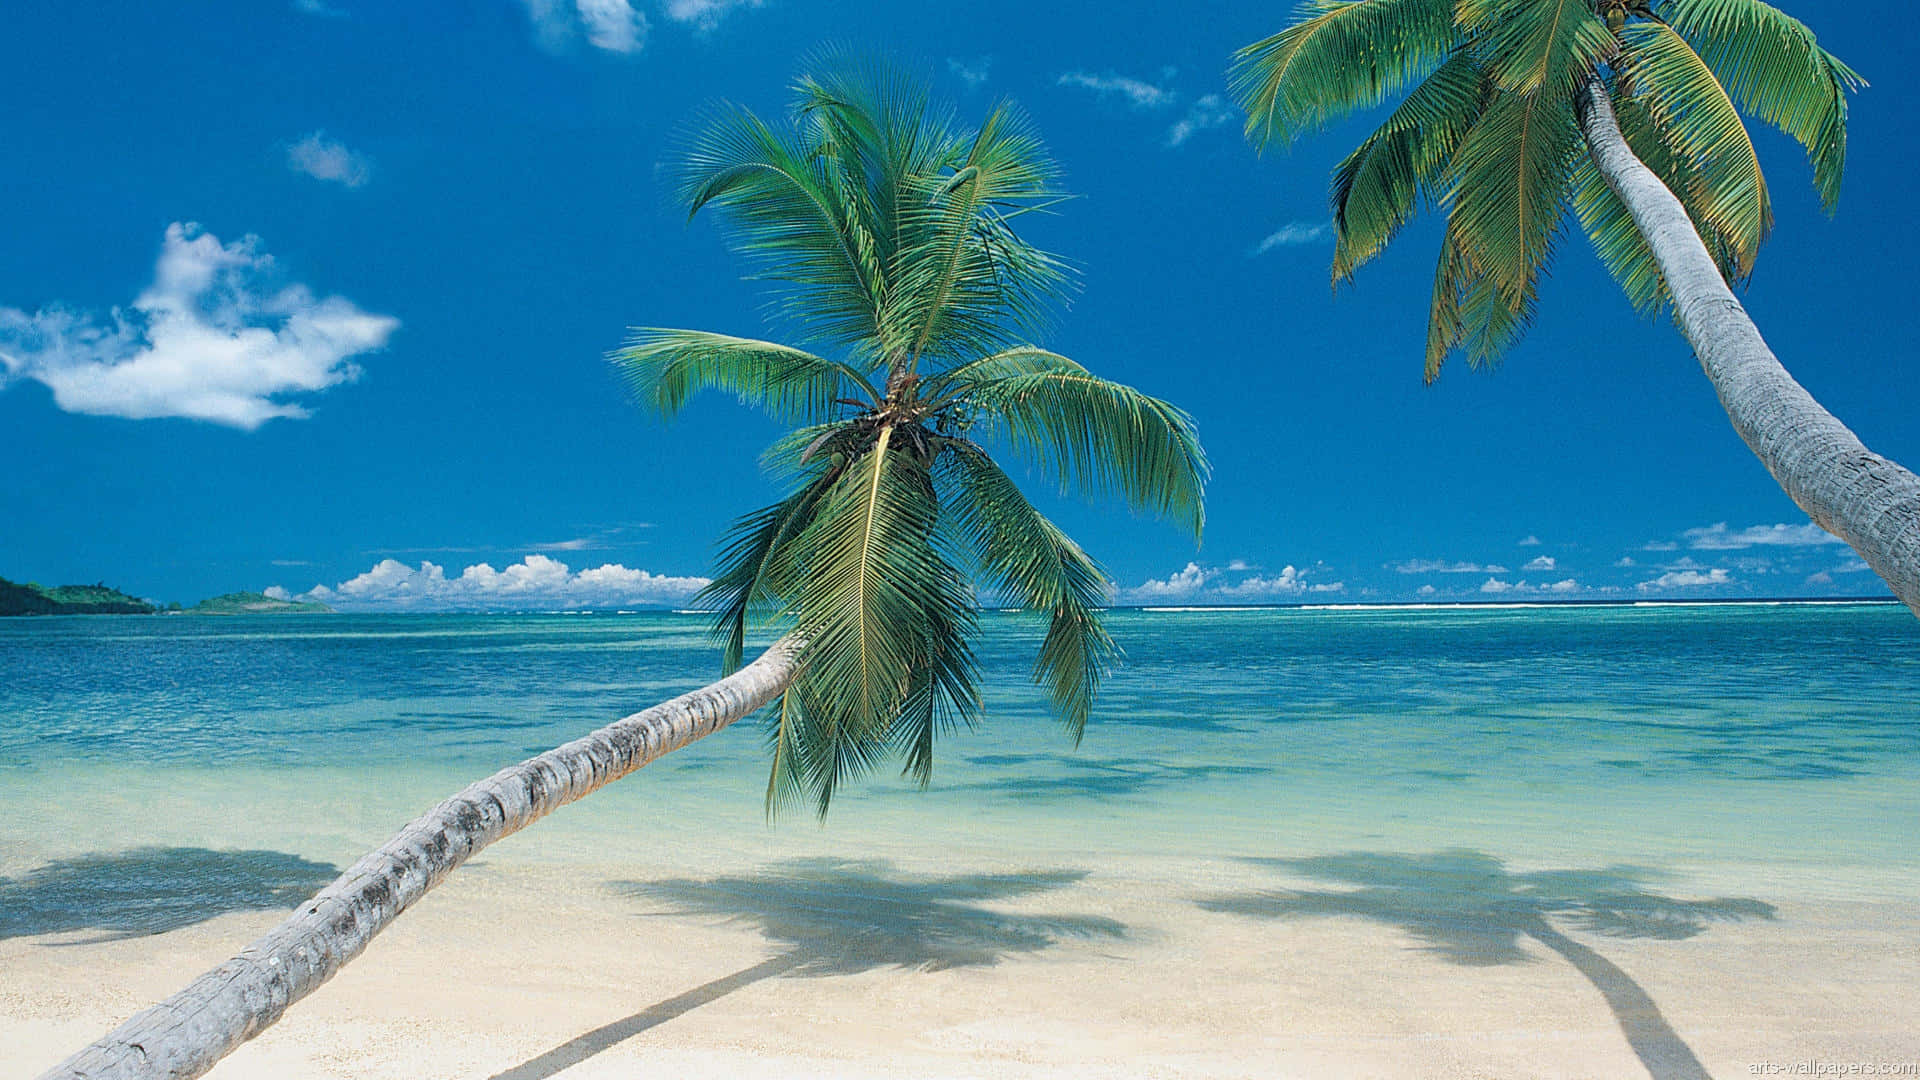 Take a break from reality and escape to this peaceful tropical beach. Wallpaper